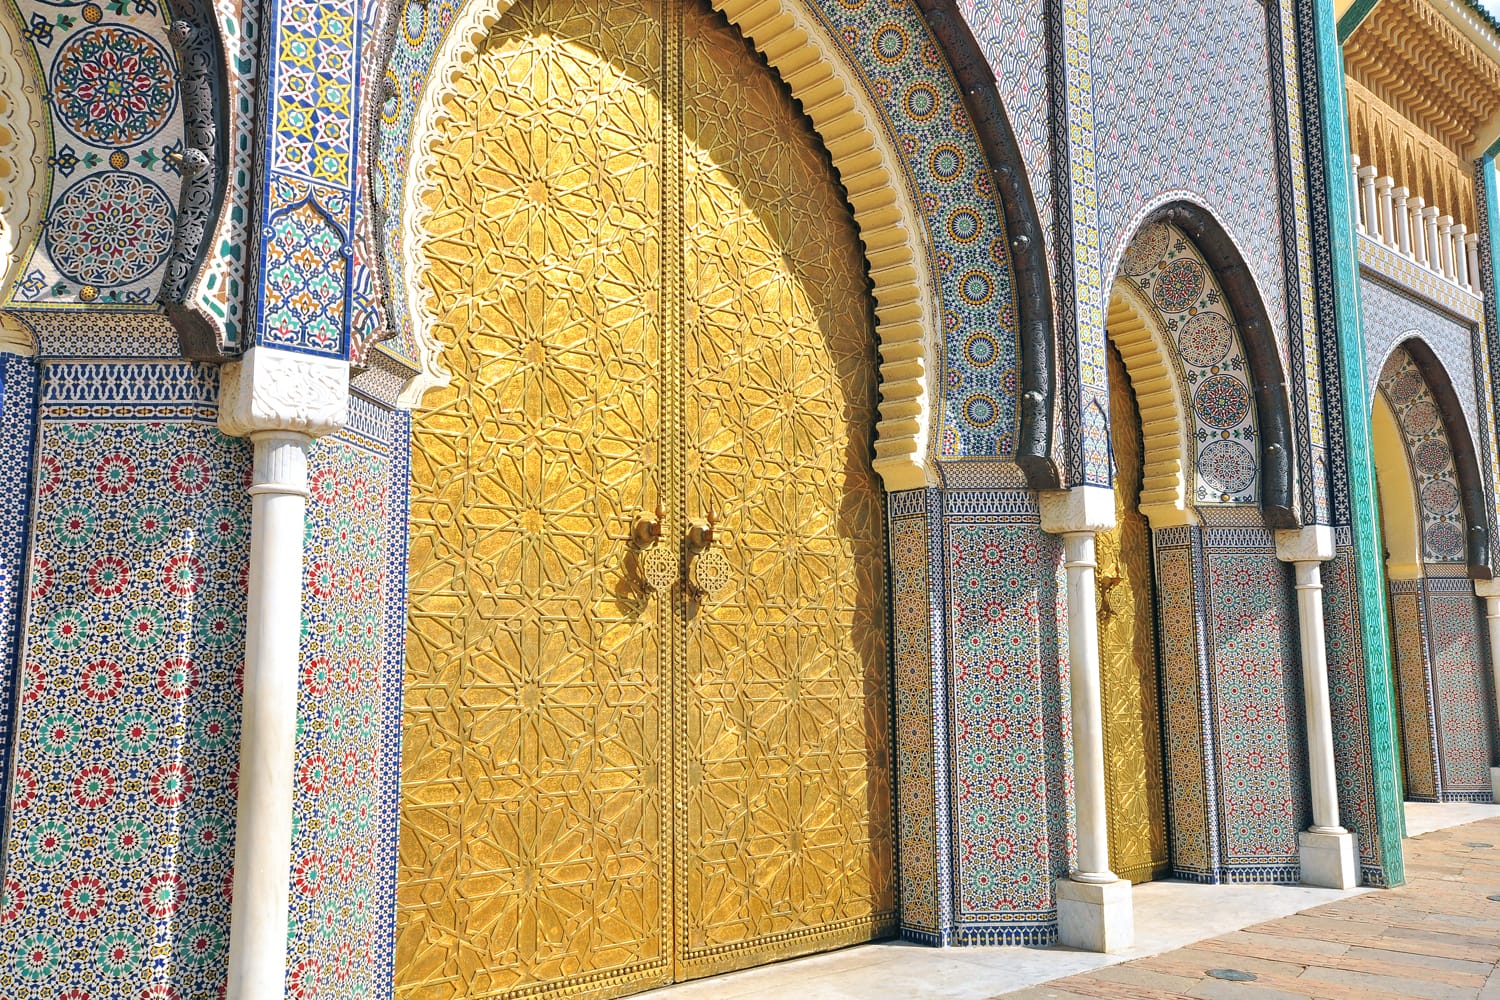 Golden gates at the Royal Palace in Fez, Morocco